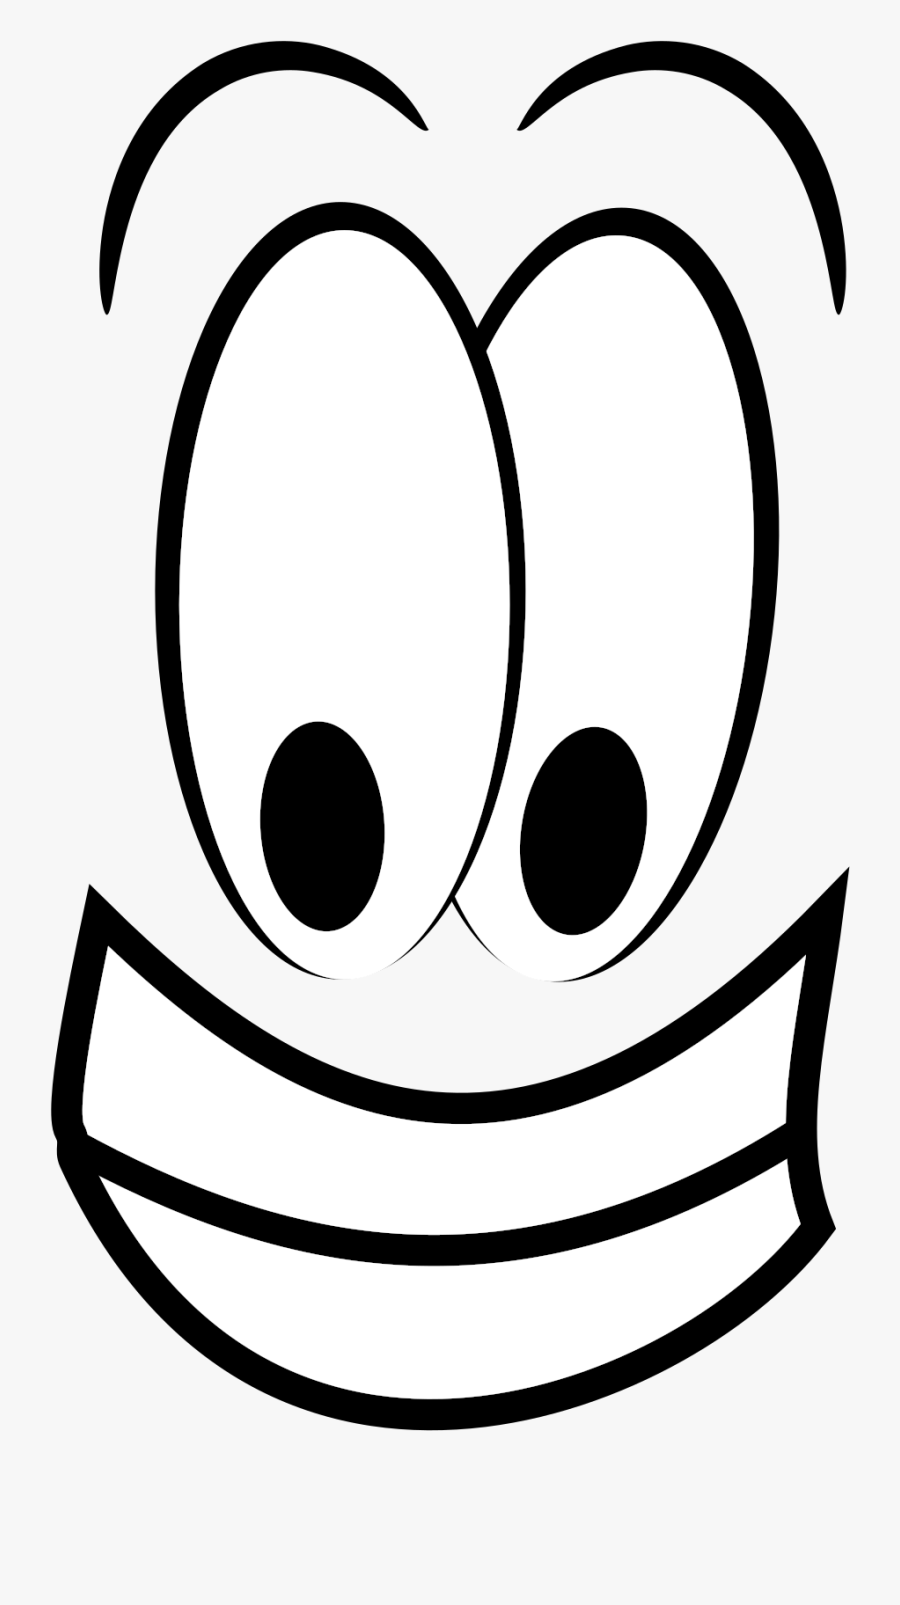 Smiley Computer Icons Happiness Drawing Cc0 - Happiness Drawing, Transparent Clipart